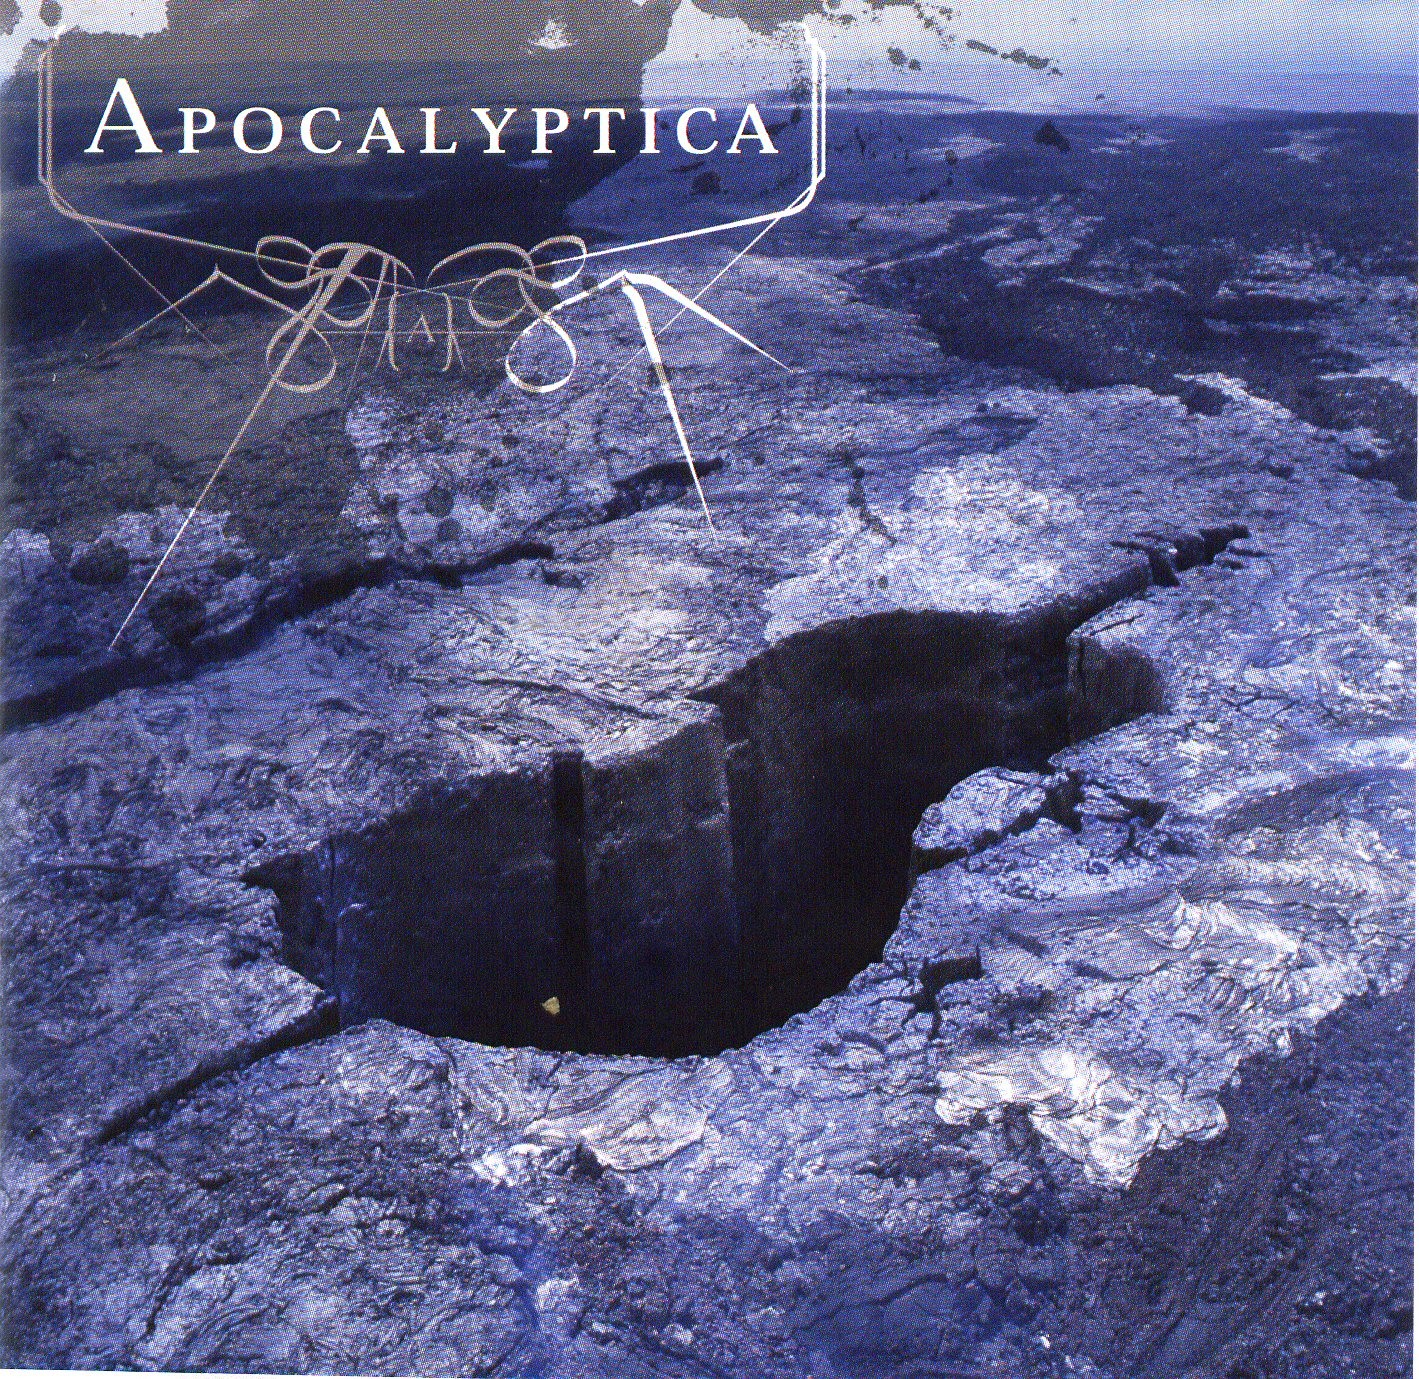 Apocalyptica - 2005 - Apocalyptica - AllCDCovers_apocalyptica_apocalyptica_2005_retail_cd-front1.jpg